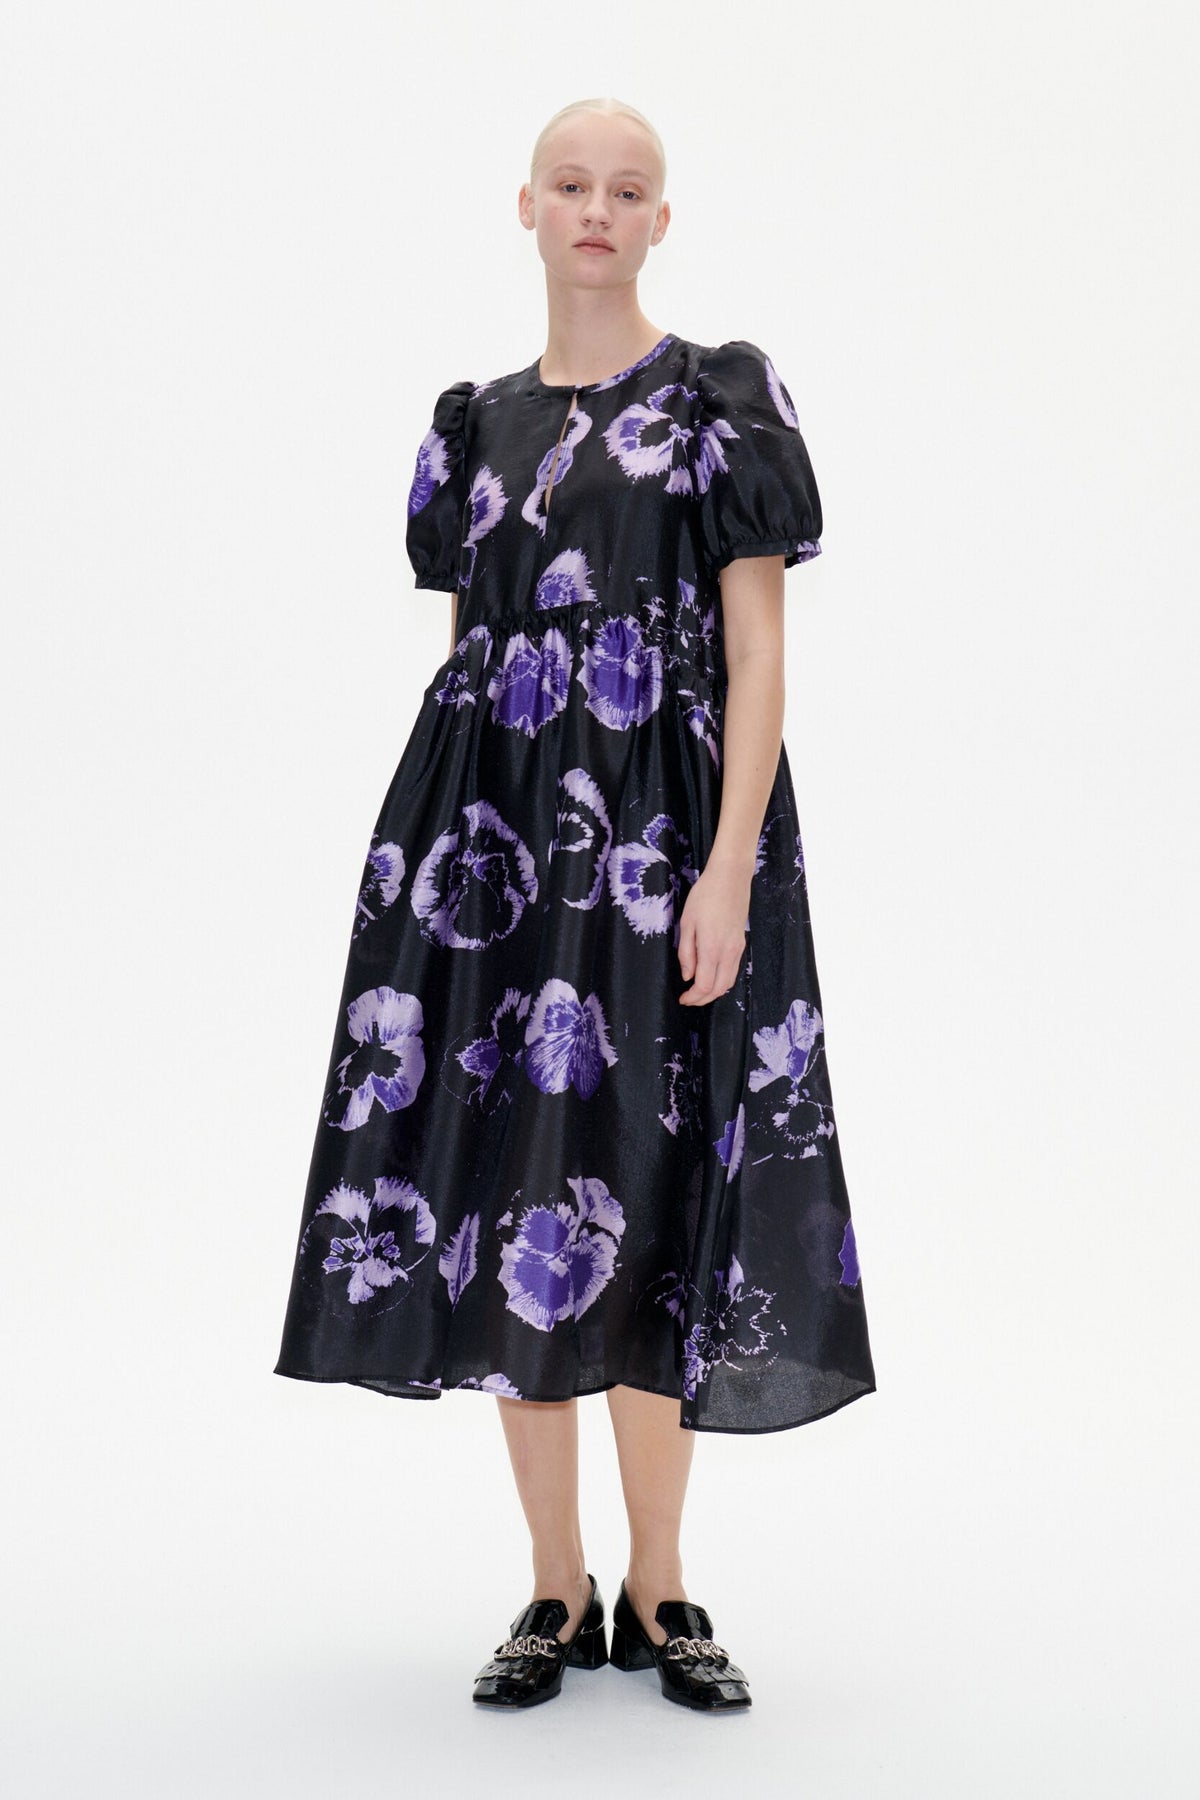 Black midi full dress with purple pansies short puff sleeves and round neck